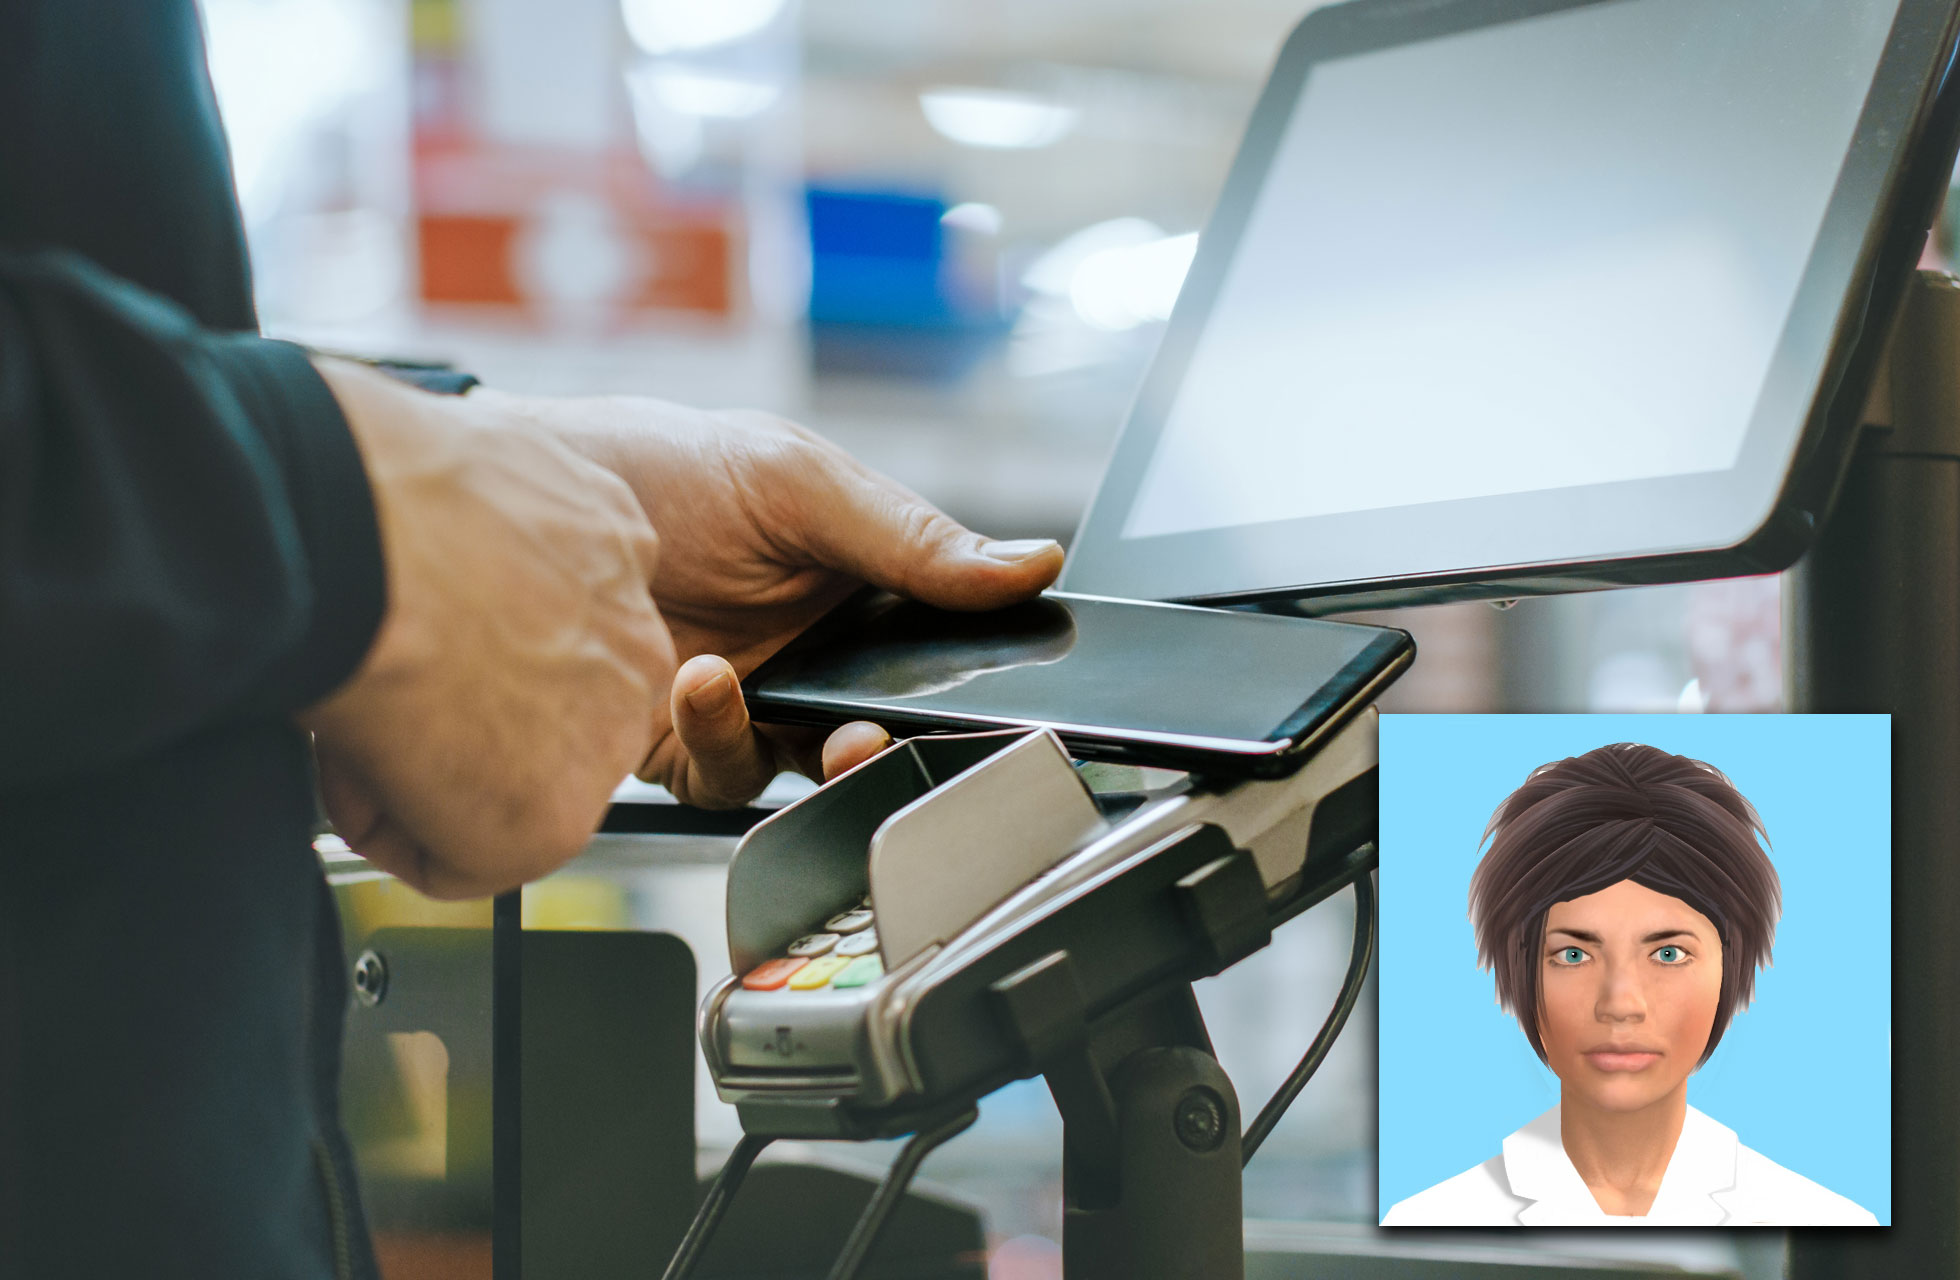 SPOTLIGHT ON: Digitised faces reduce shoplifting risk at self-service checkouts